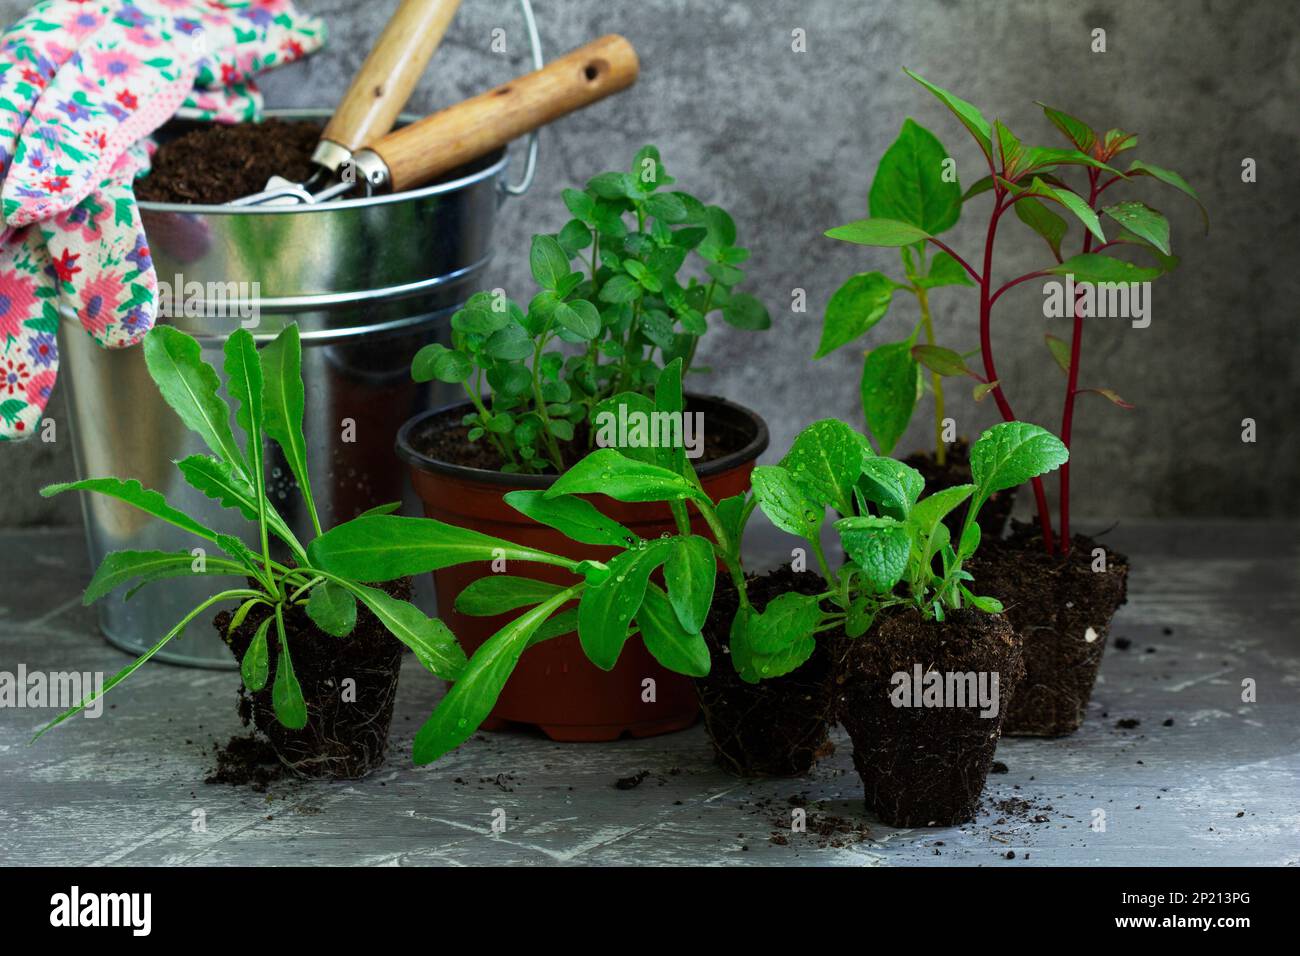 Flower seedlings, soil, gardening tools and gloves on a concrete table. Stock Photo